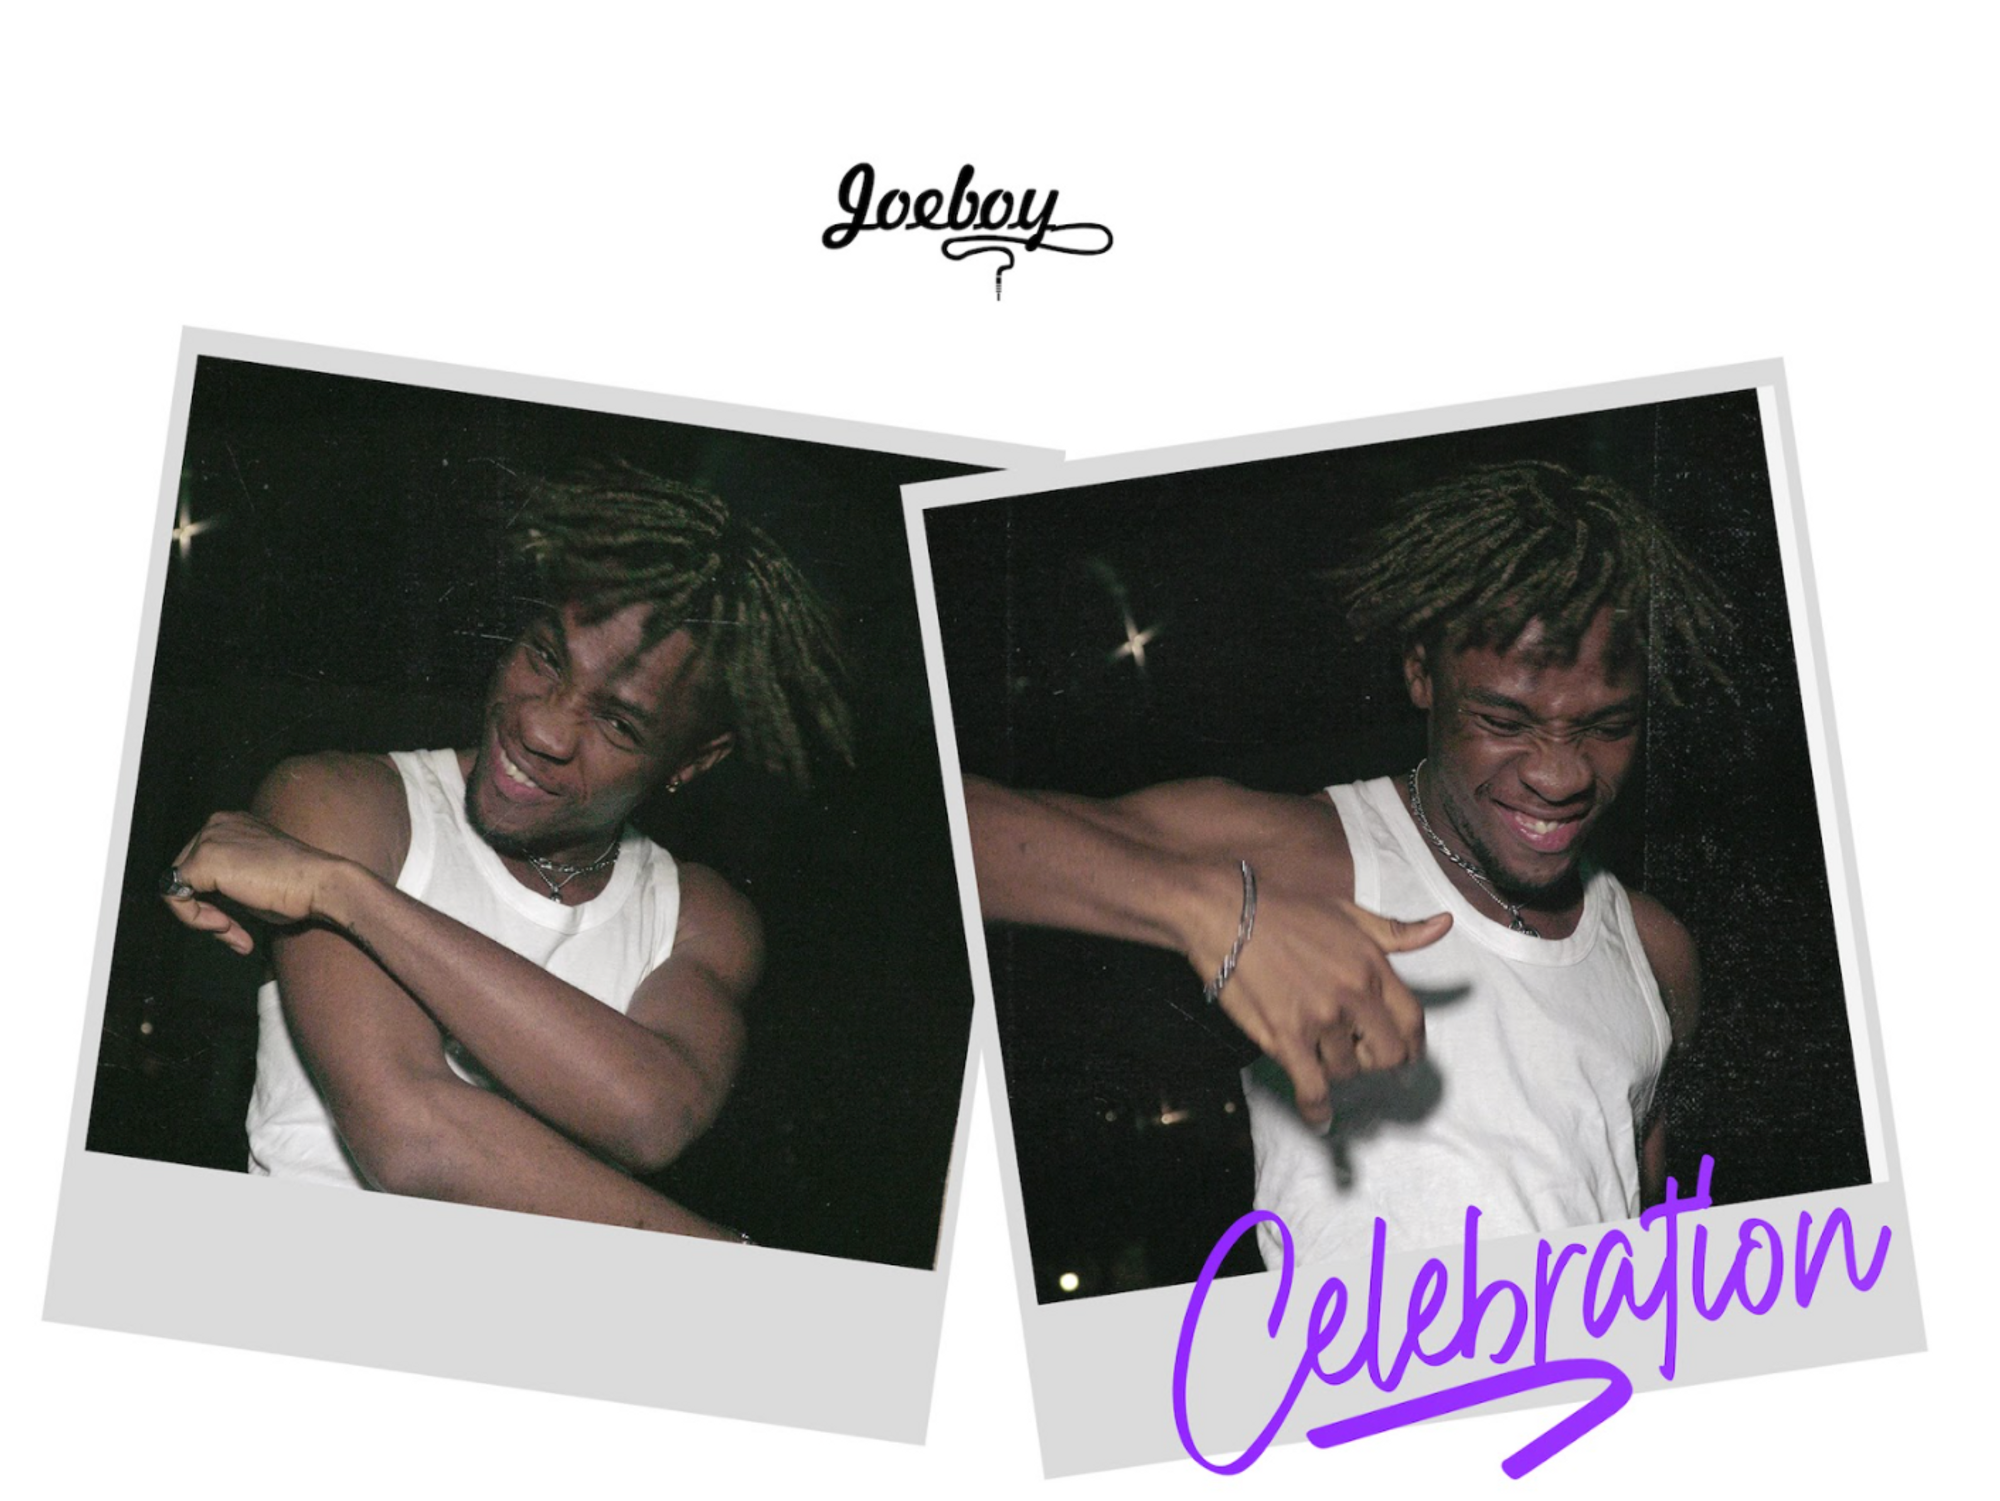 Joeboy Comes Through With a 'Celebration'